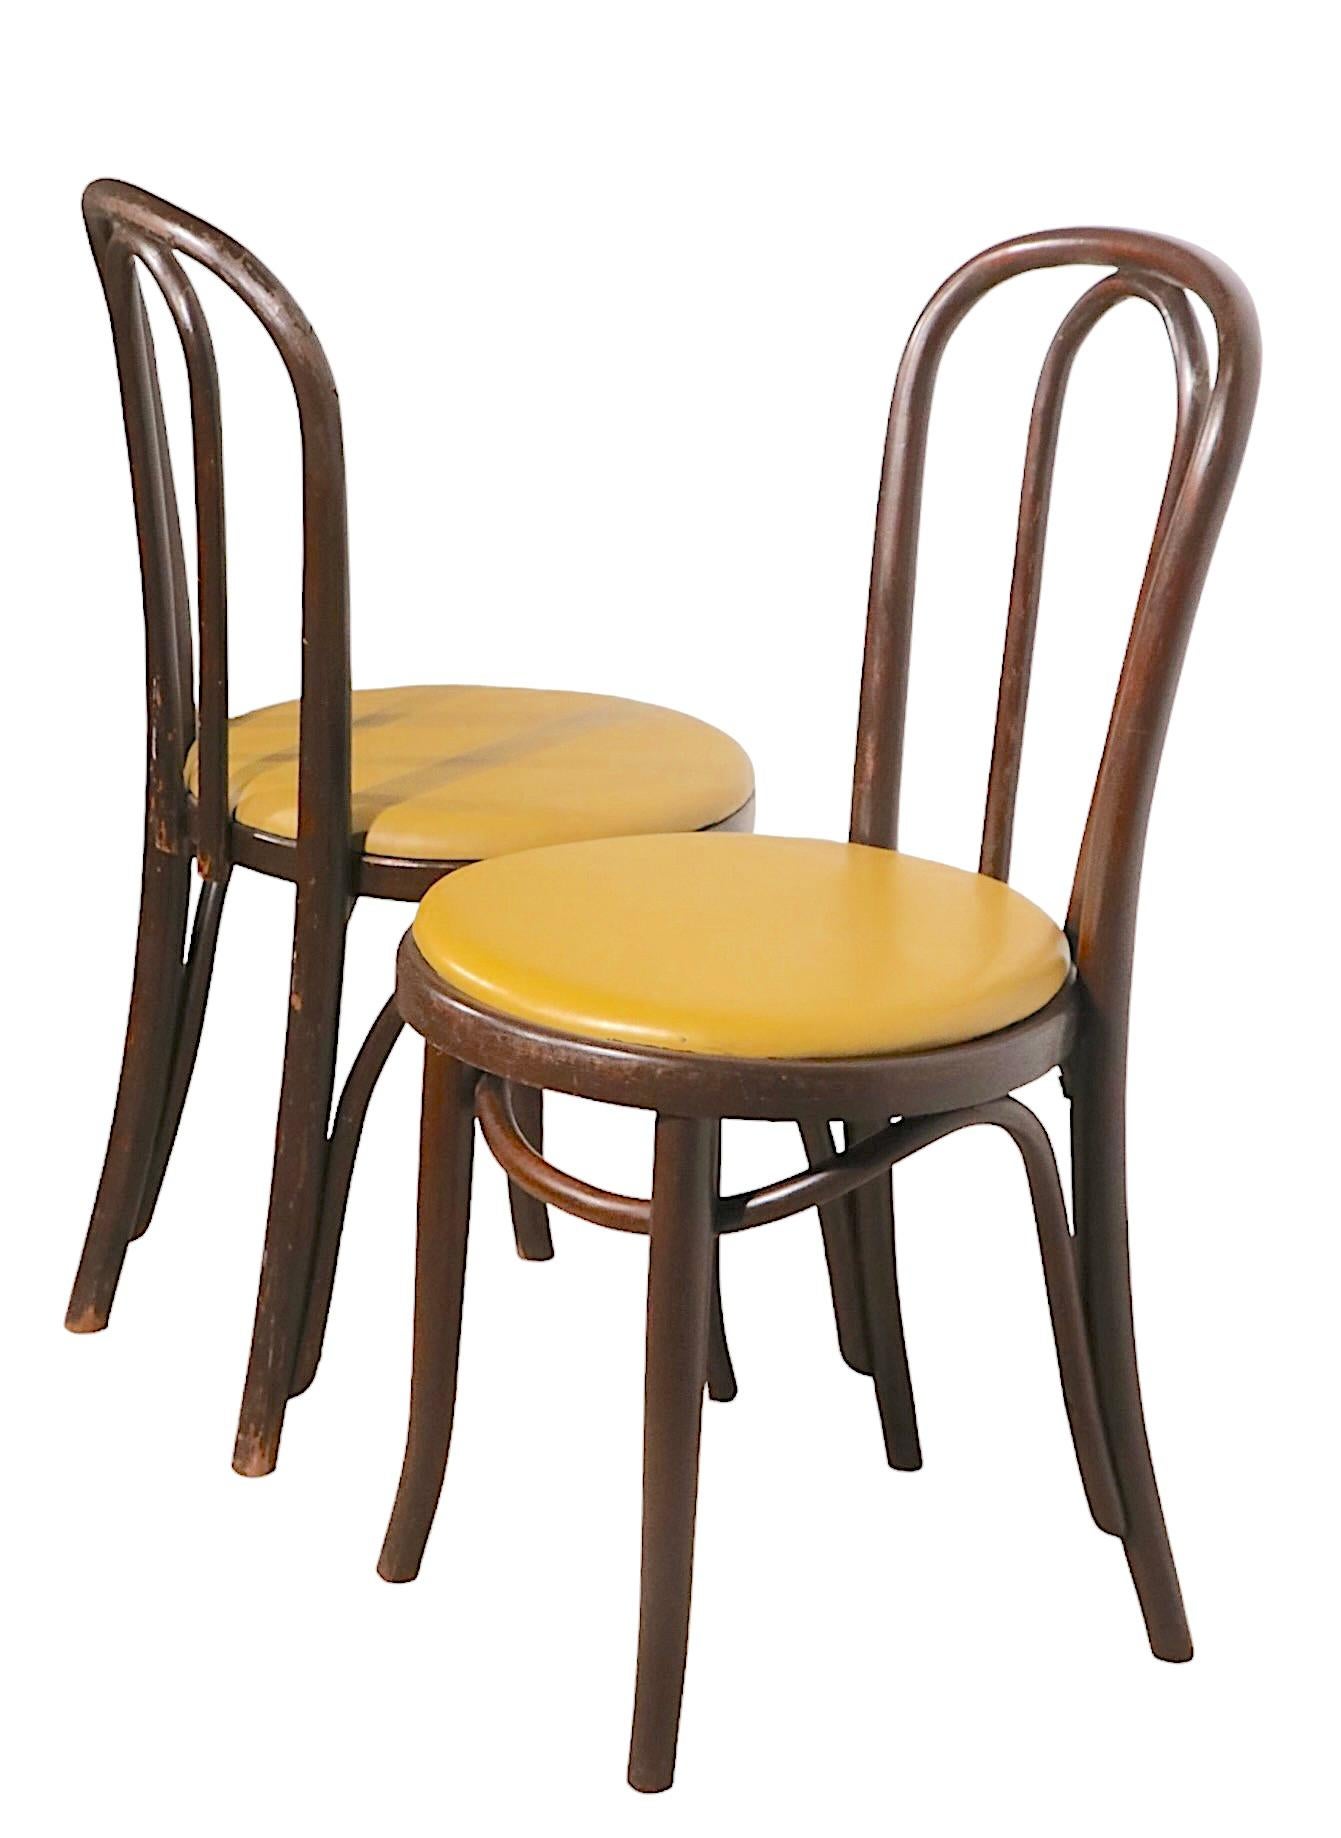 Chic, sophisticated pair of cafe, bistro style dining chairs of bentwood frames with vinyl pad seats. These chairs are in very good vintage condition, showing some cosmetic wear, normal and consistent with age. Offered and priced as a pair,